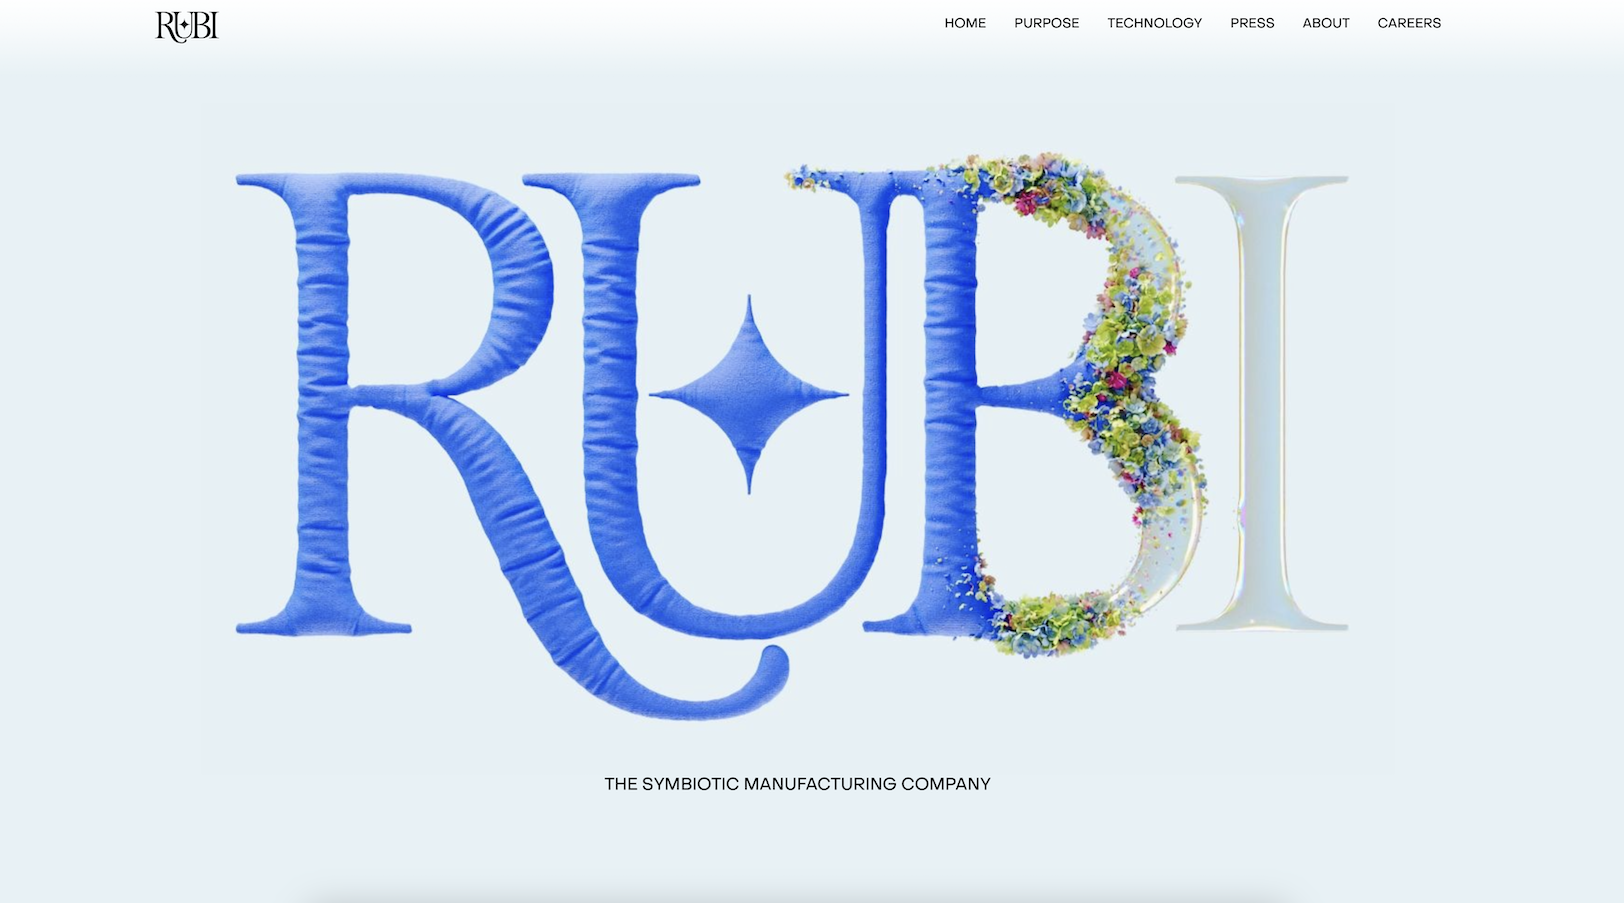 “Eating Carbon Dioxide and Breathing Out Cellulose”: US Biotech Startup Rubi Laboratories Receives $8.7 Million in Seed Round Funding